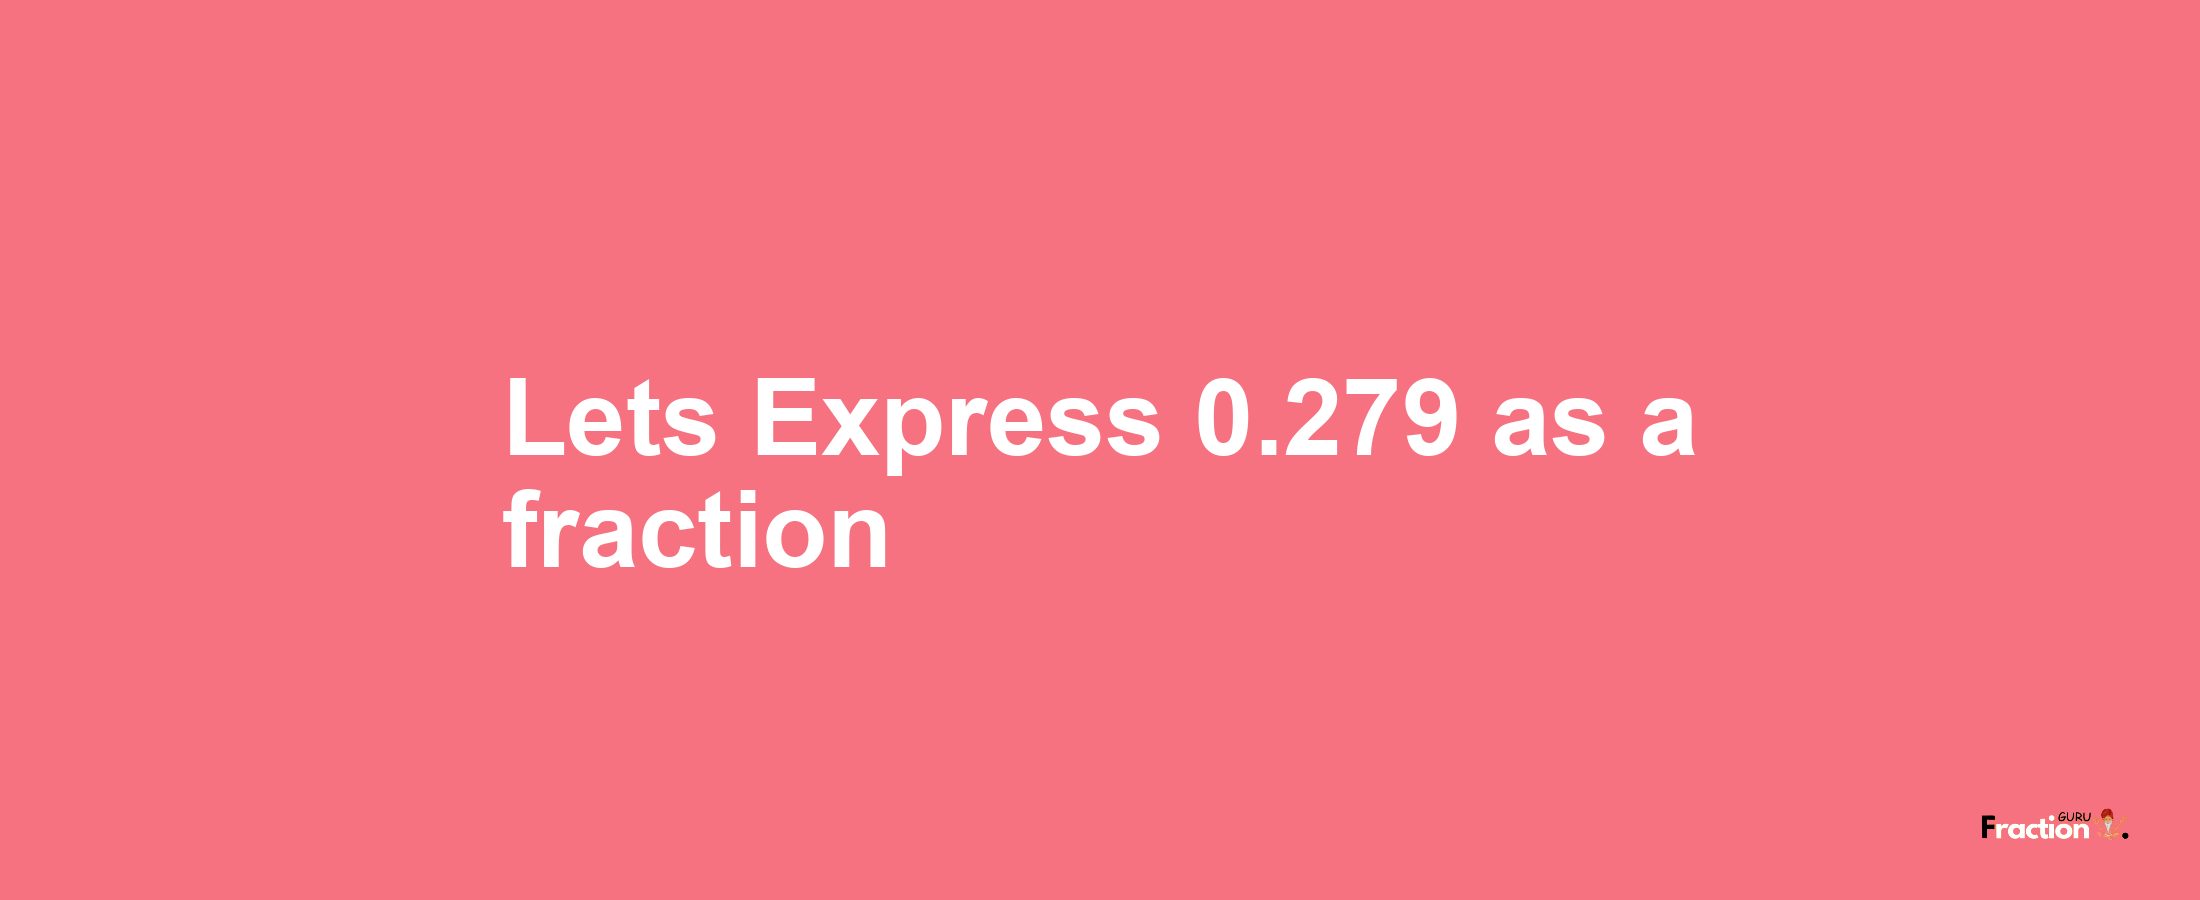 Lets Express 0.279 as afraction